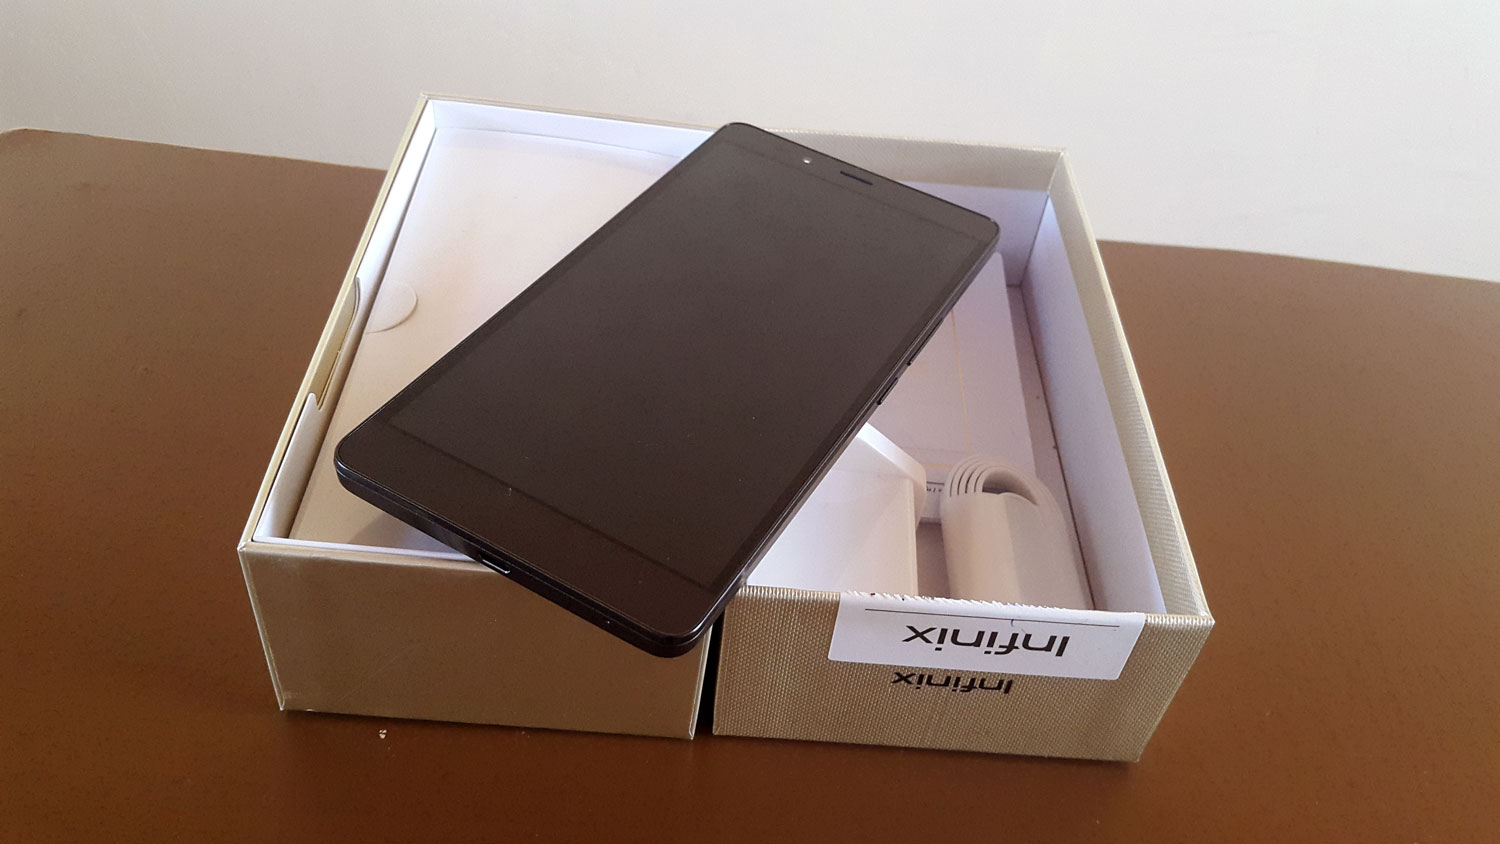 [image] Infinix Note 2 unboxing'